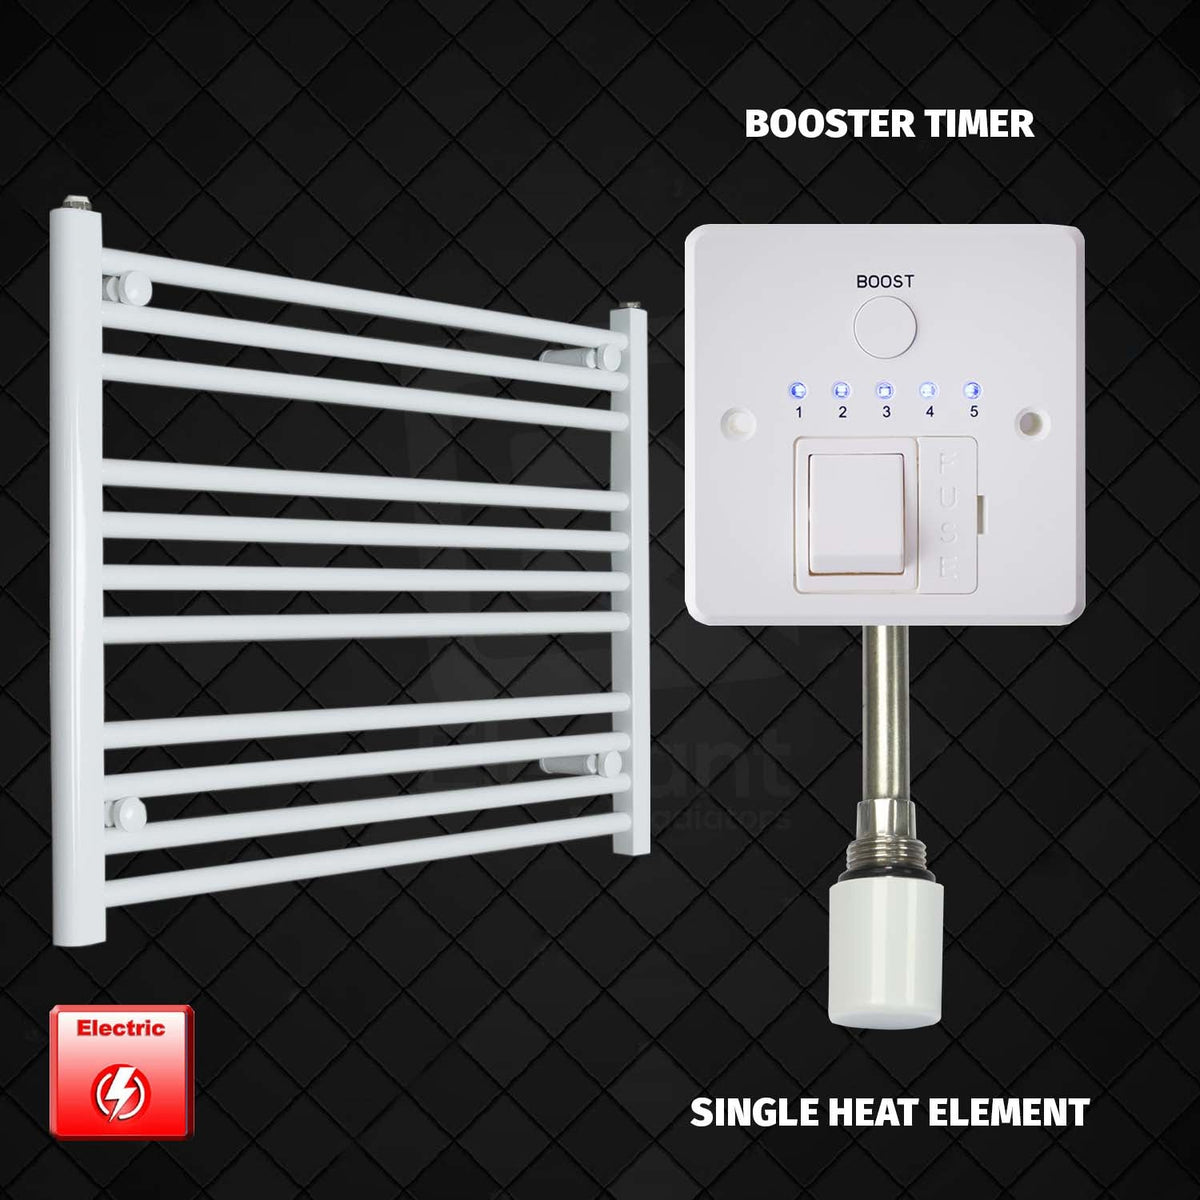 600 x 900 Pre-Filled Electric Heated Towel Radiator White HTR Single heat element Booster timer